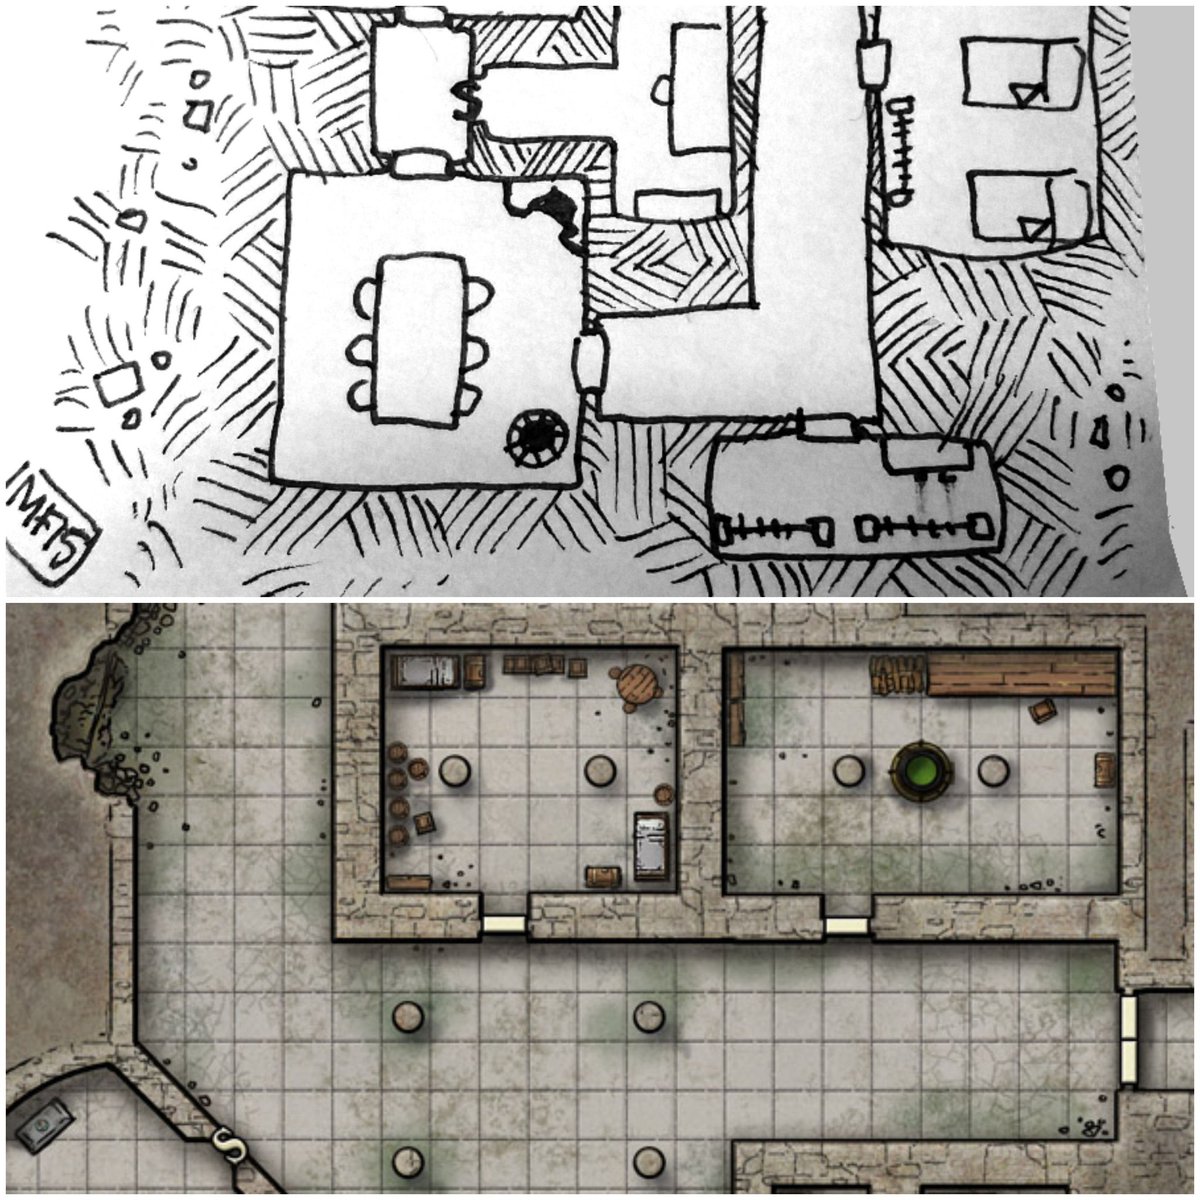 Miska S Maps Above My First Mapvember Map From 15 That S When I Started Drawing Maps Again After A Long Pause Below A Dungeon I Did Recently For The Upcoming Strongholds